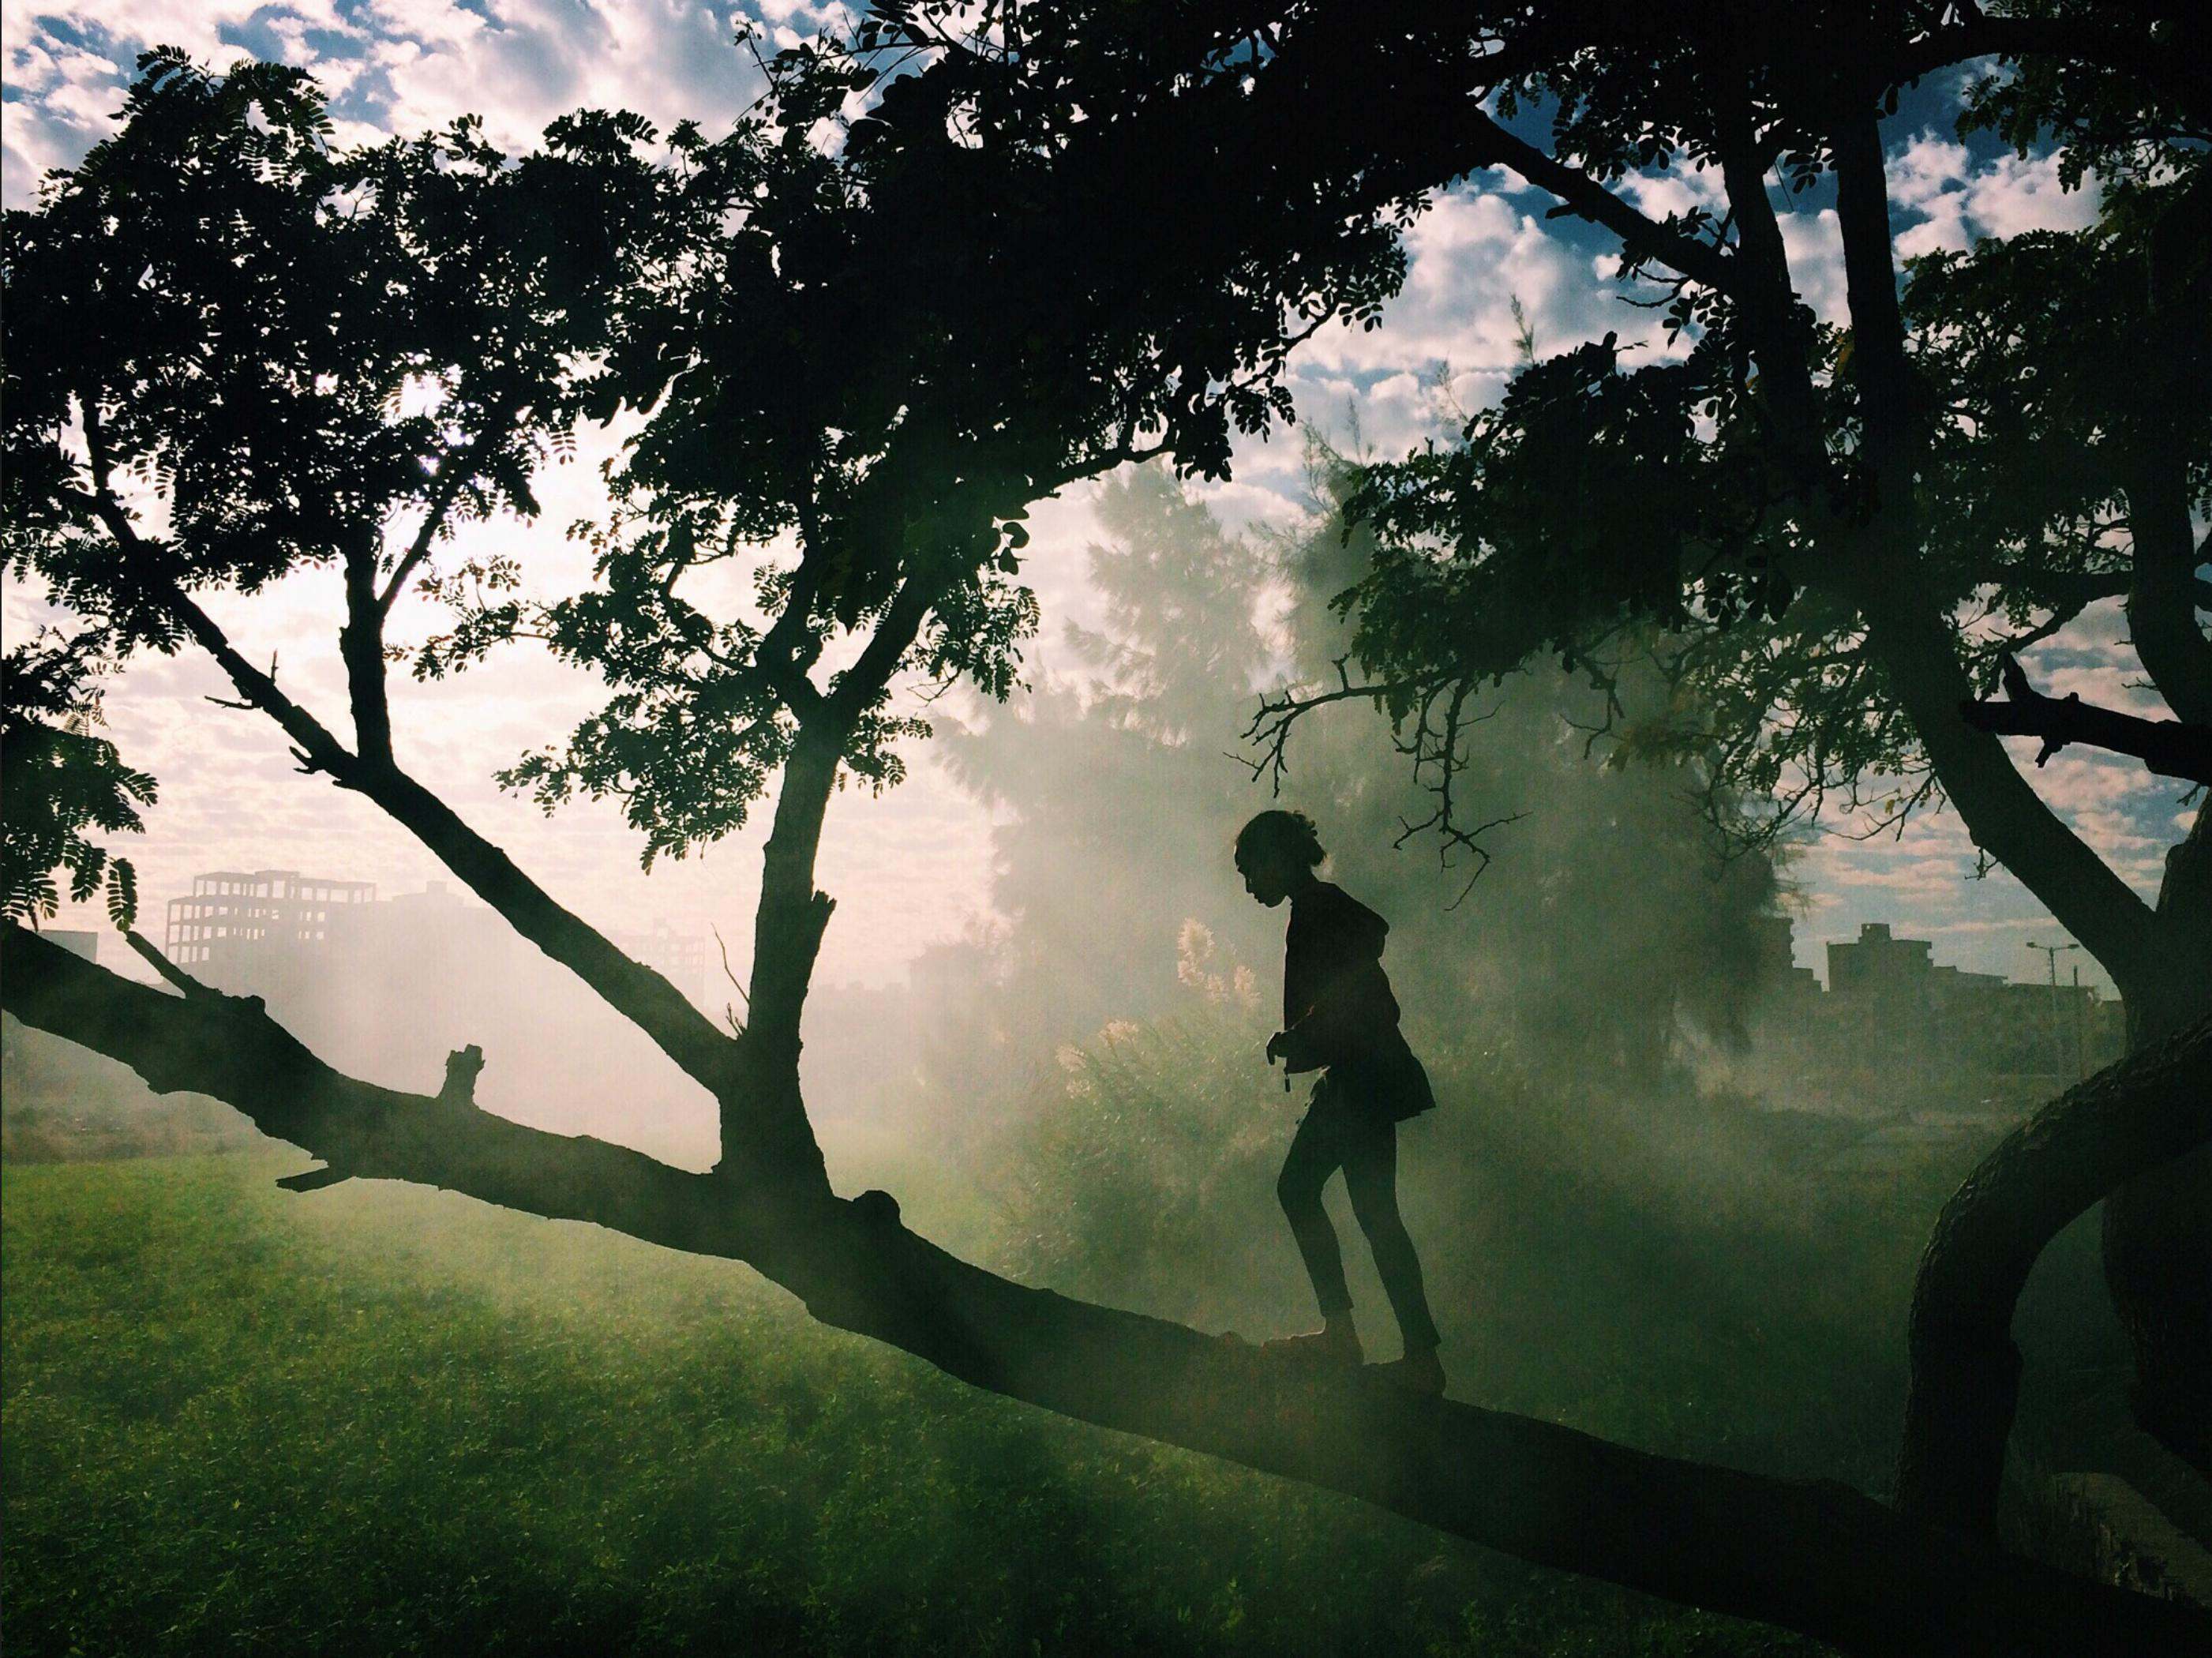 A girl stands on a tree branch in the smoky air near a city in Egypt.